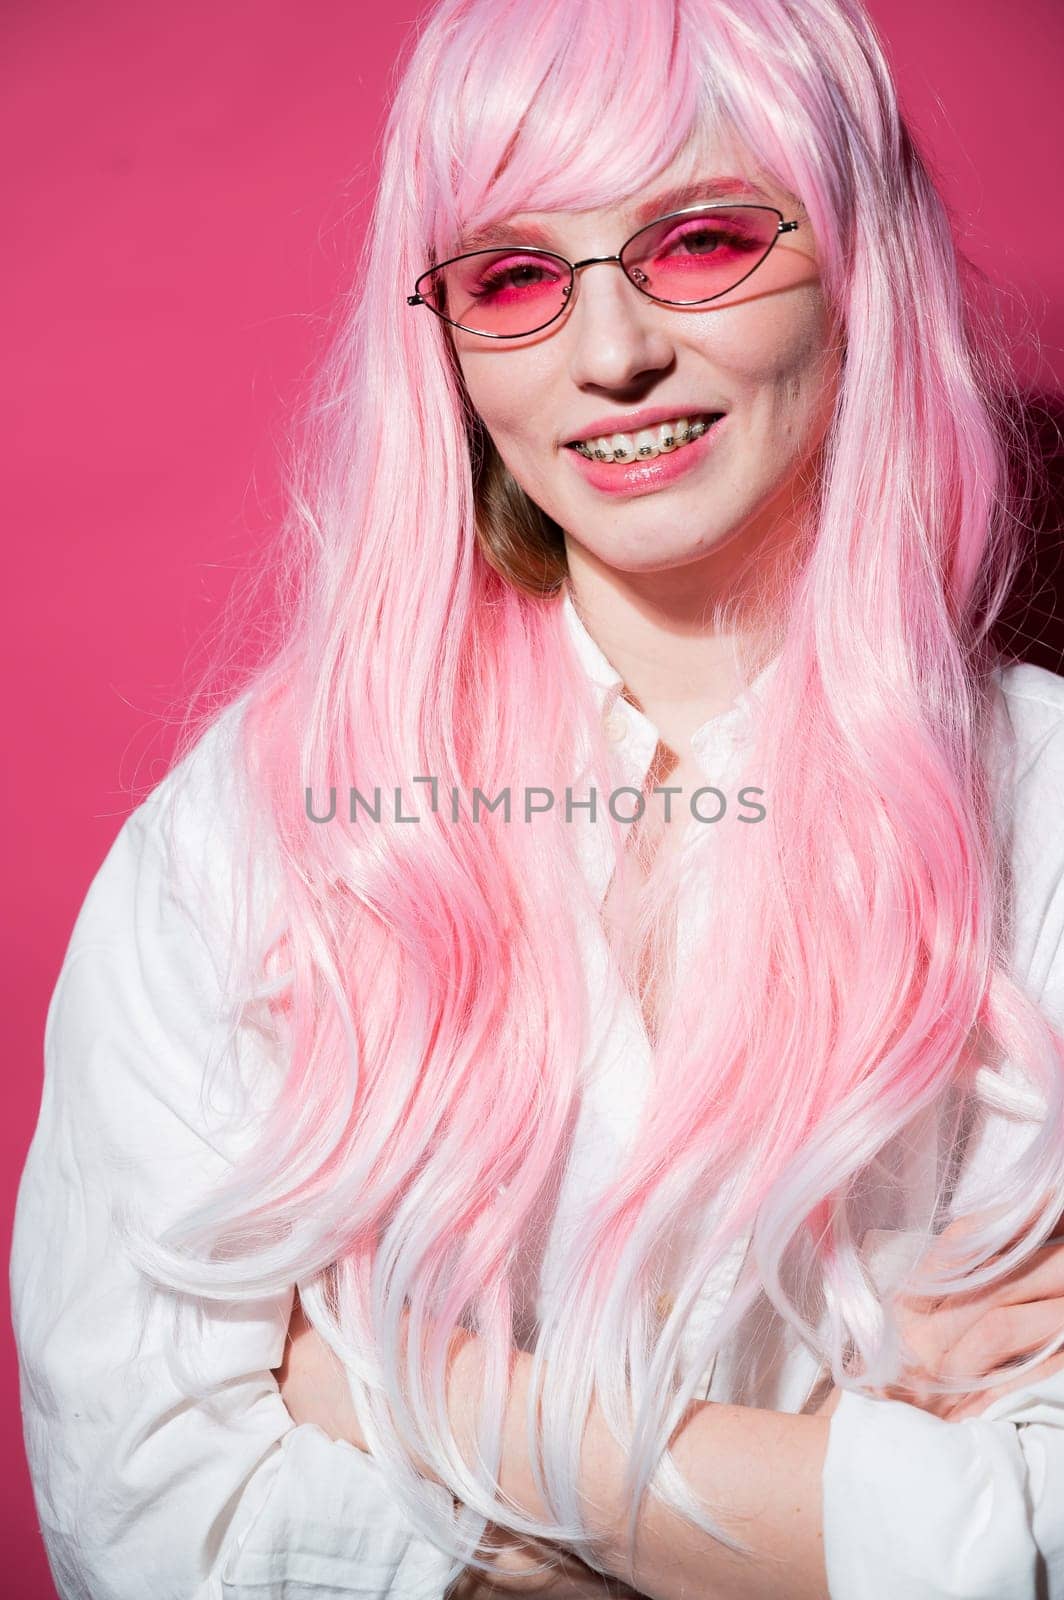 Close-up portrait of a young woman with braces in a pink wig and sunglasses on a pink background. Vertical photo. by mrwed54